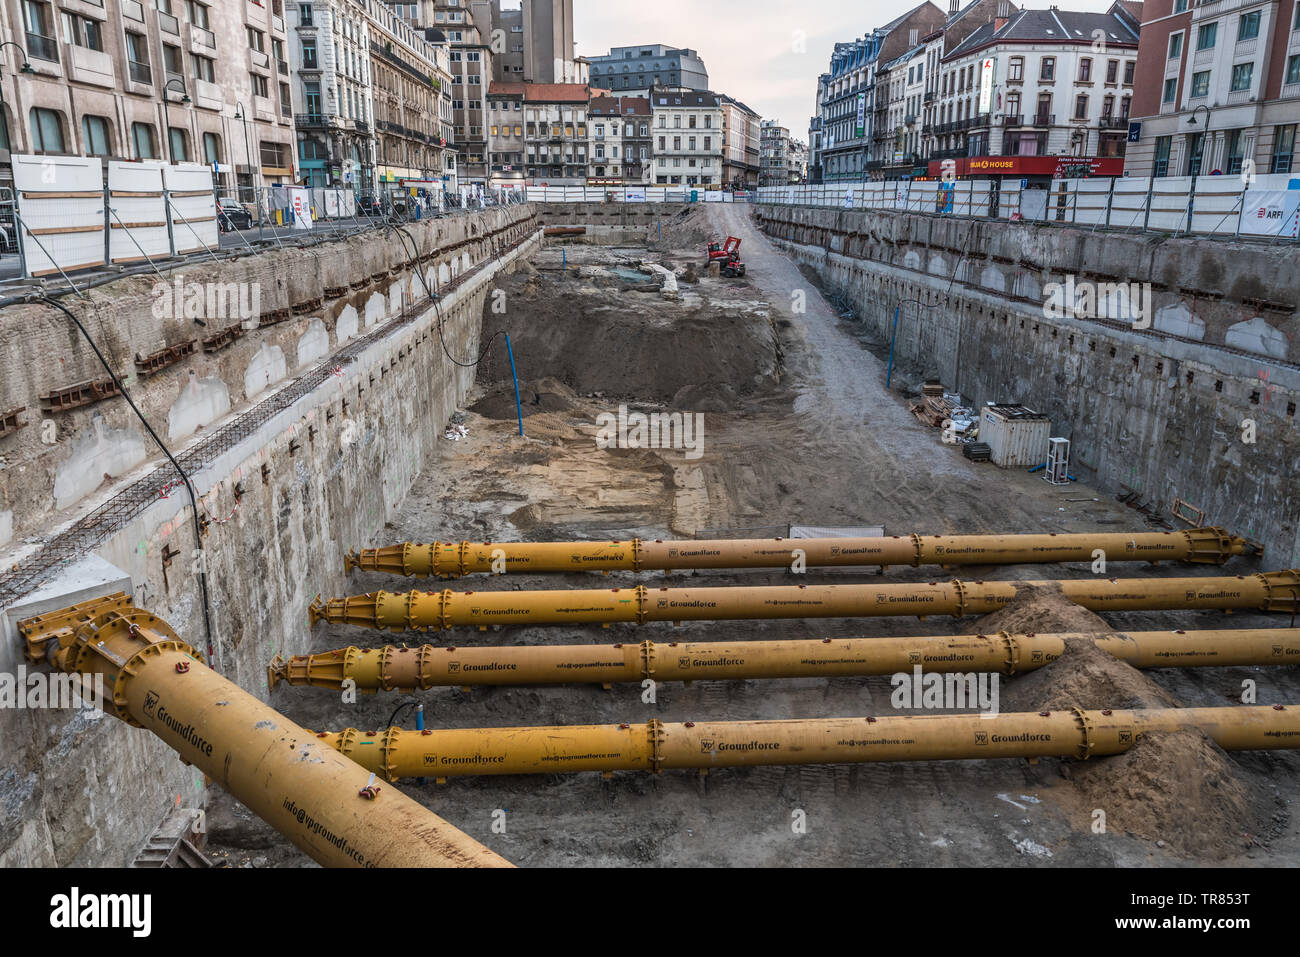 Brussels Old Town / Belgium - 05 22 2019: The construction site of the ancien demolished Parking 58 with a large concrete foundation and metal foundat Stock Photo